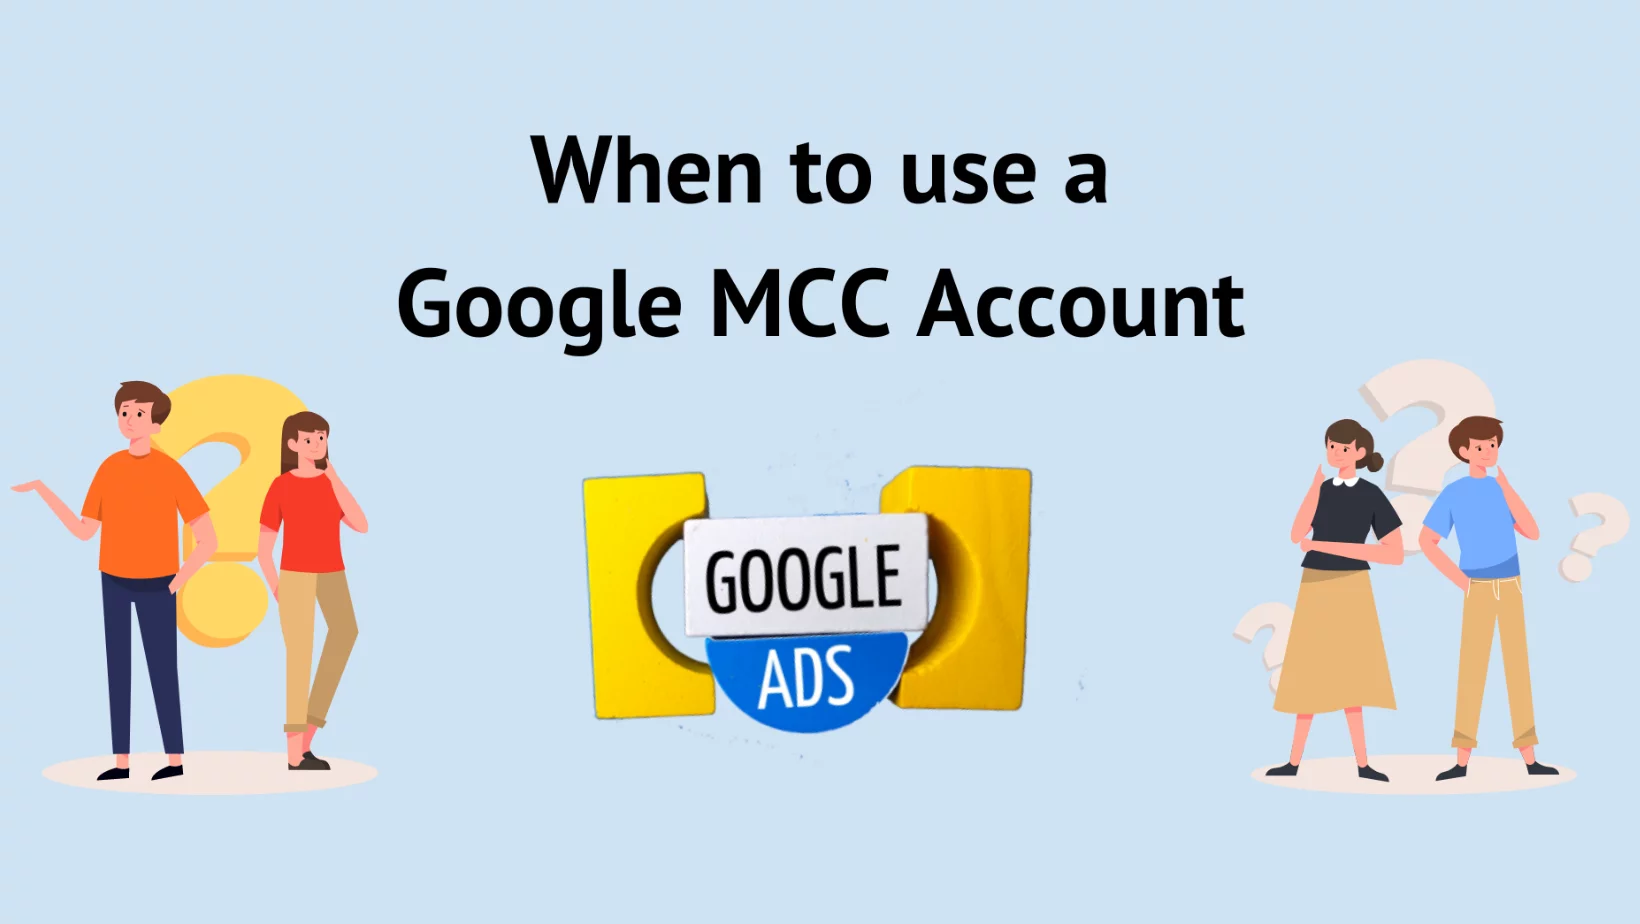 When to use an MCC account?